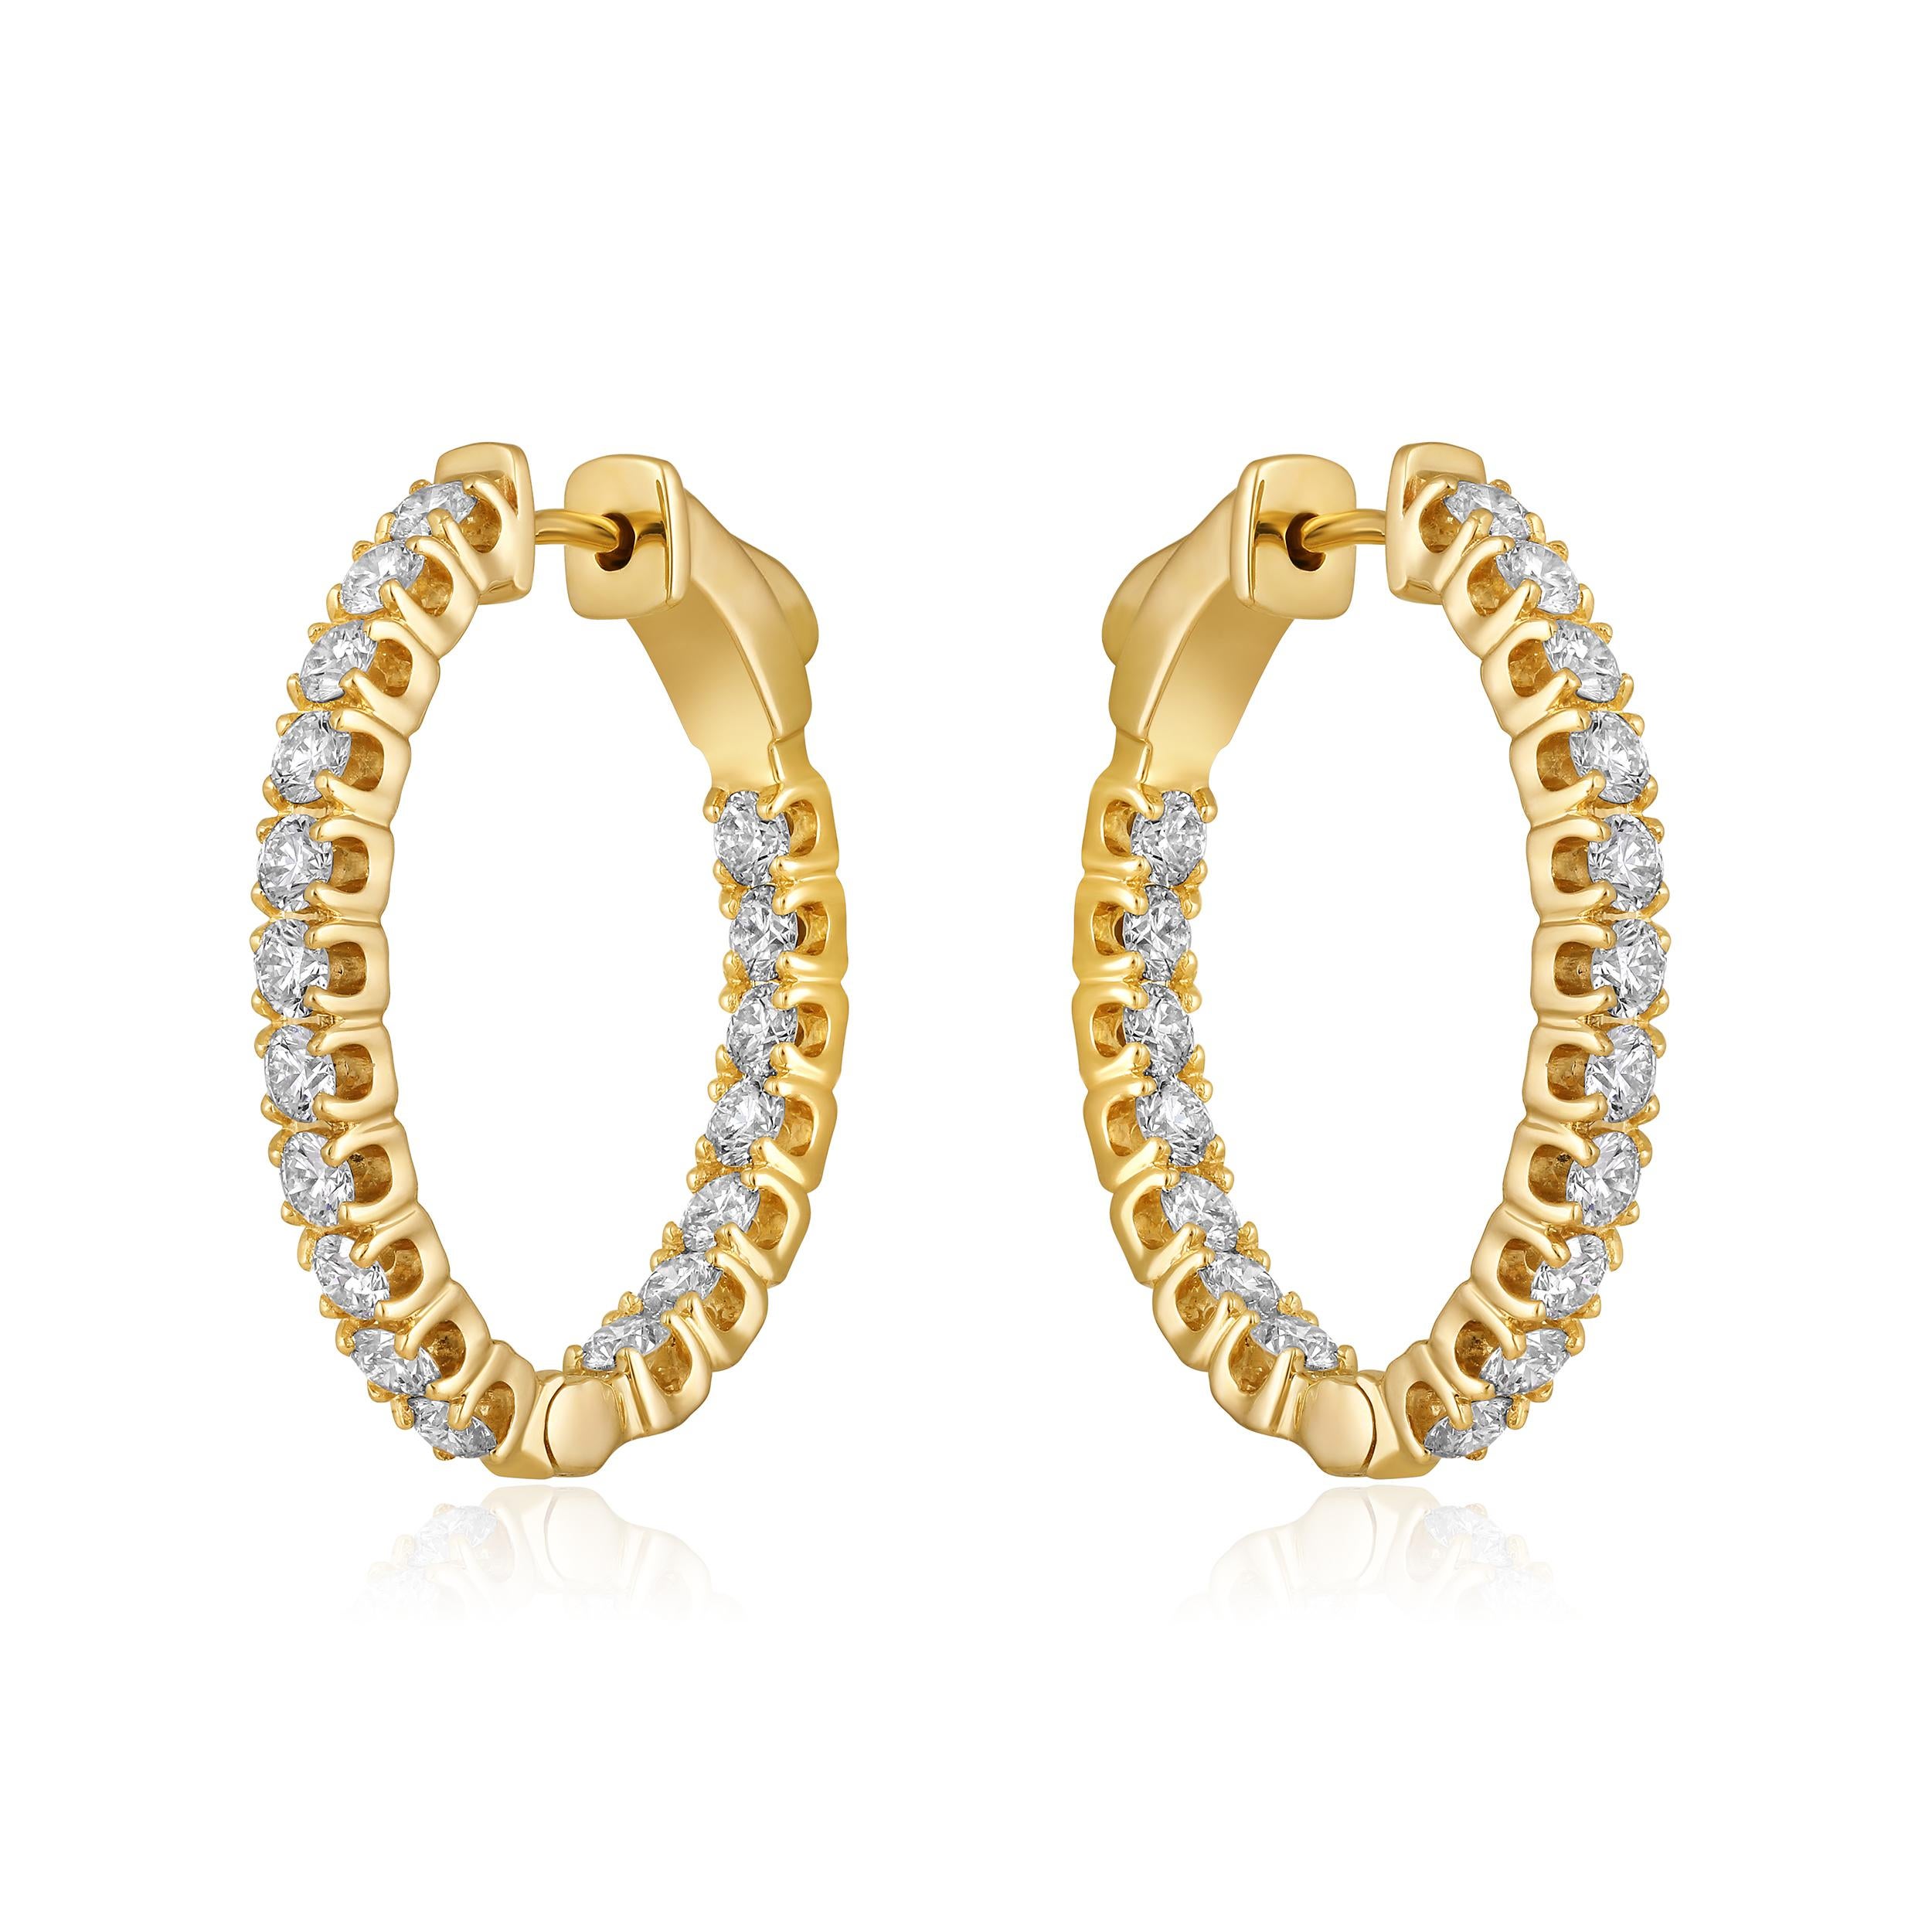 Crafted in 7.1 grams of 14K Yellow Gold, the earrings contain 36 stones of Round Natural Diamonds with a total of 2.01 carat in F-G color and VS-SI clarity.

CONTEMPORARY AND TIMELESS ESSENCE: Crafted in 14-karat/18-karat with 100% natural diamond